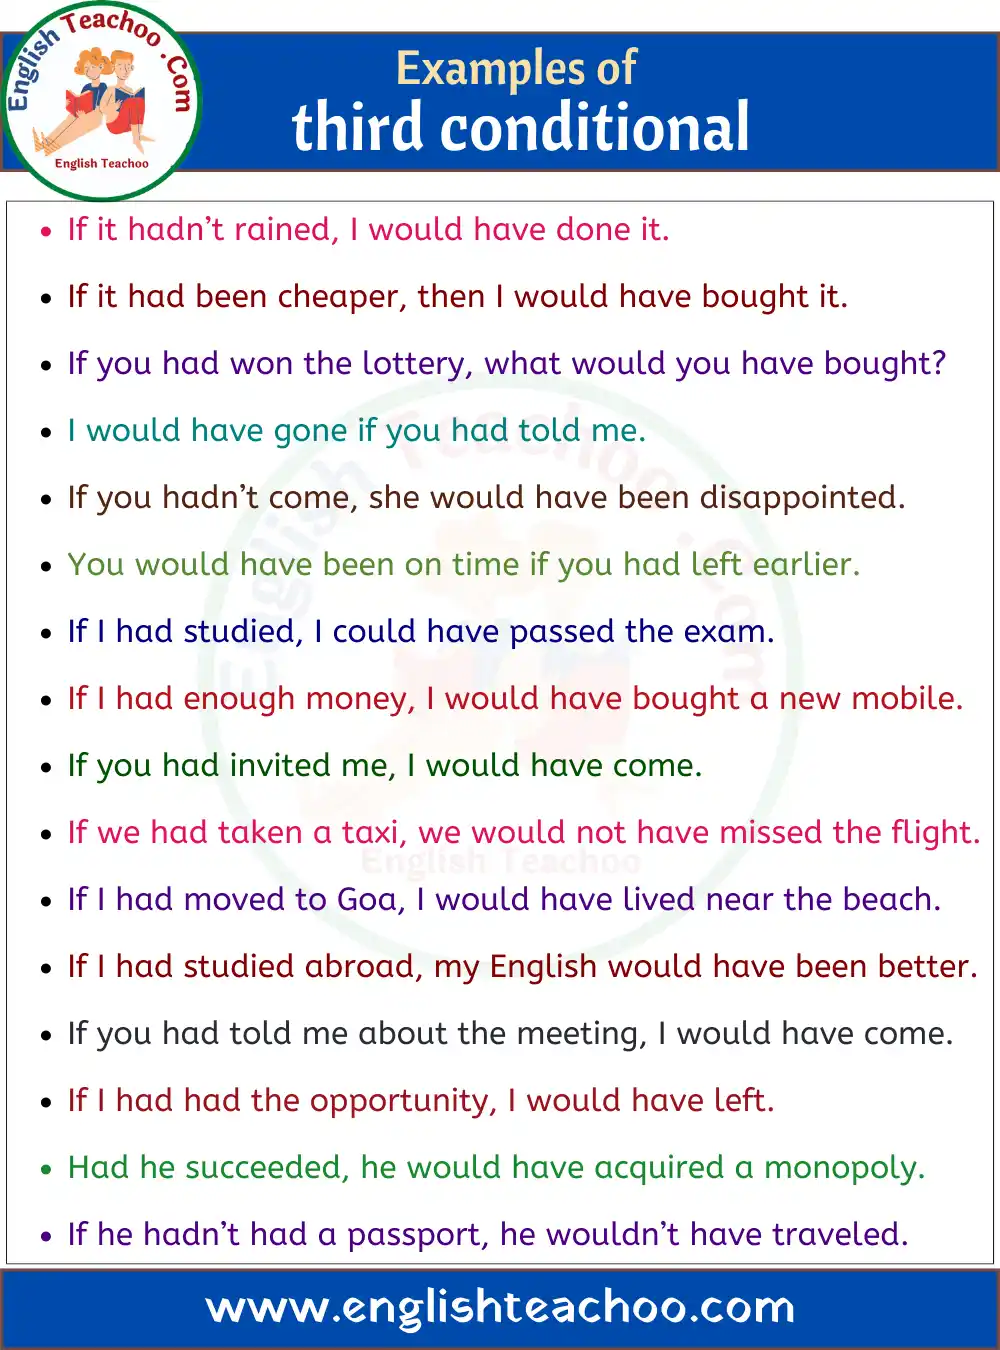 20 Examples of Third Conditional Sentences